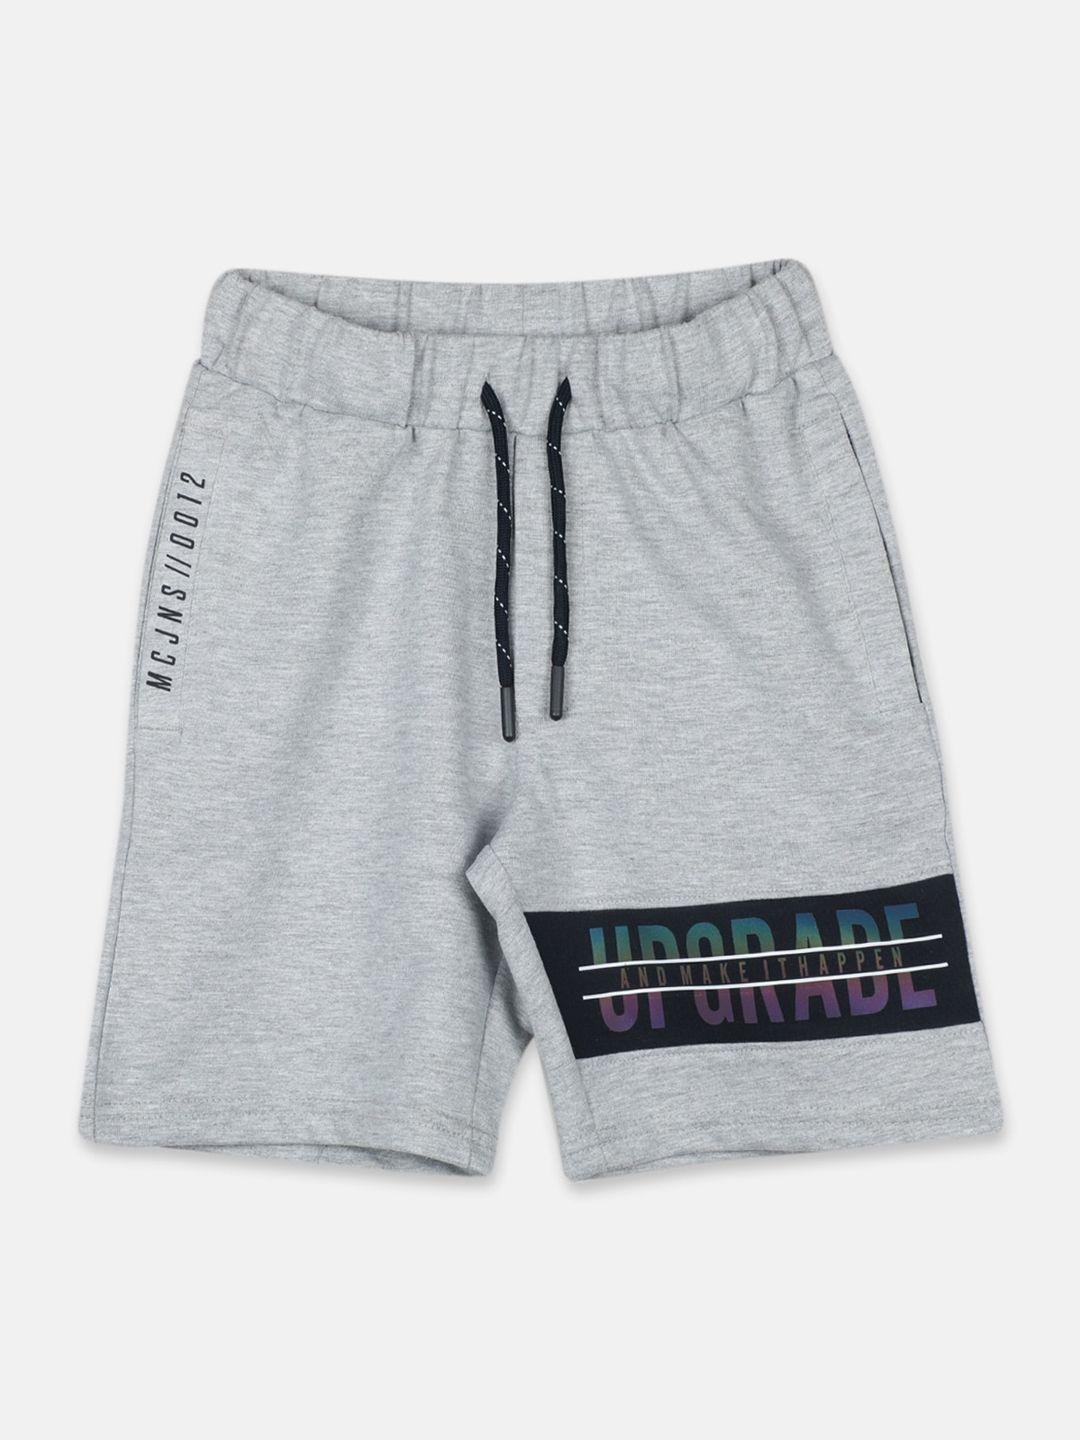 monte carlo boys typography printed mid-rise shorts